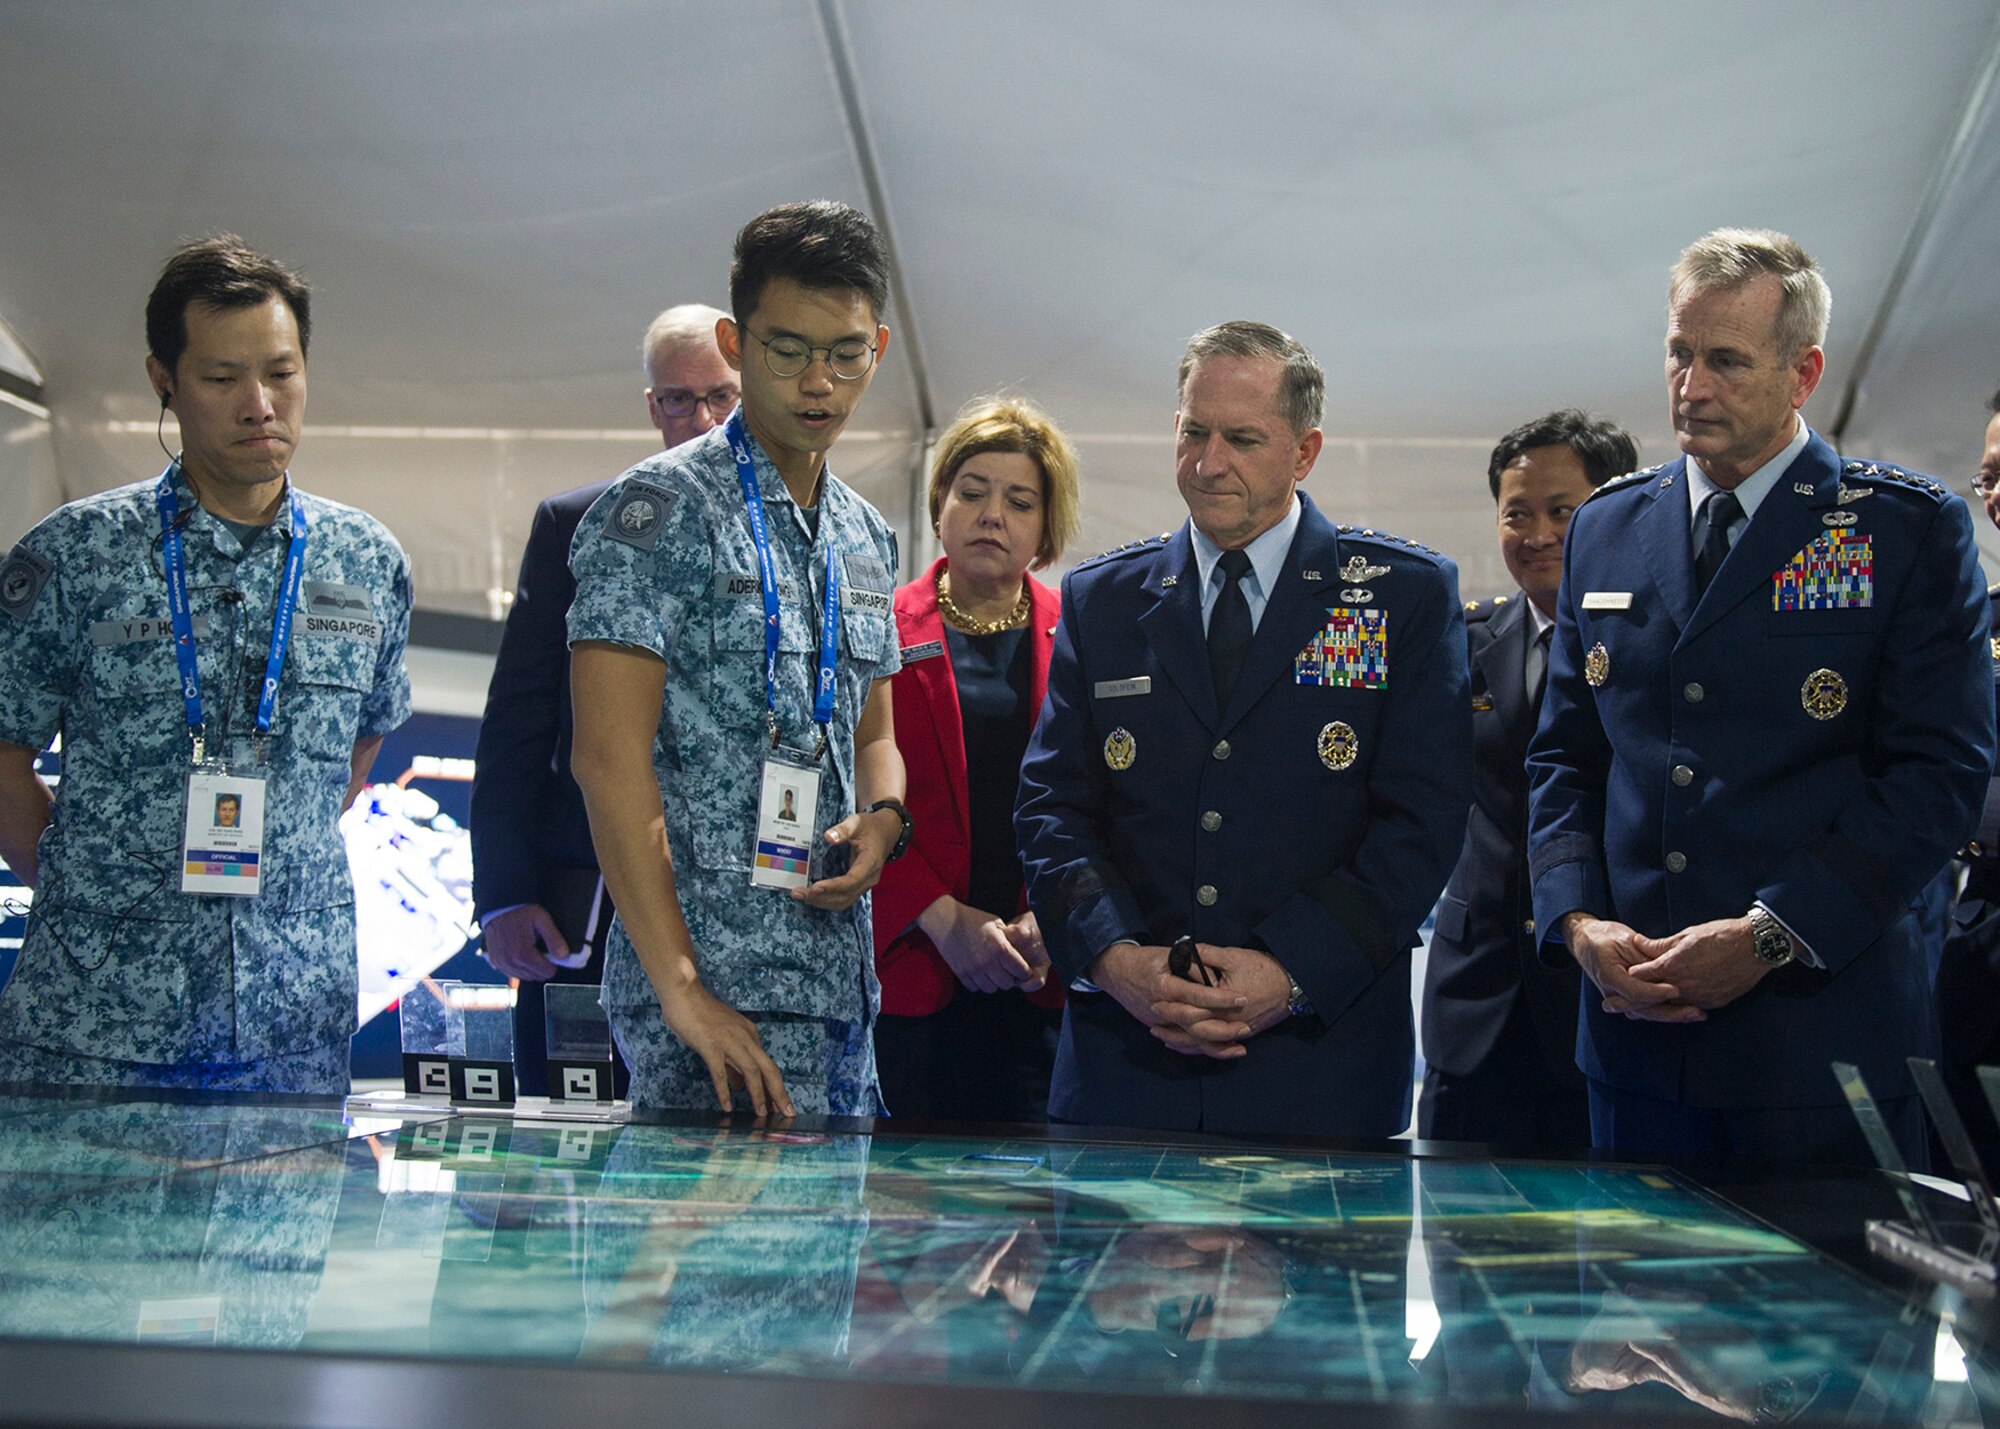 Gen. David L. Goldfein, U.S. Air Force chief of staff, Gen. Terrence J. O’Shaughnessy, Pacific Air Forces commander, and Heidi H. Grant, Deputy Under Secretary of the Air Force, International Affairs, receive a demonstration of a display during the 2018 Singapore International Airshow, Changi Exhibition Centre, Singapore, Feb. 6, 2018.